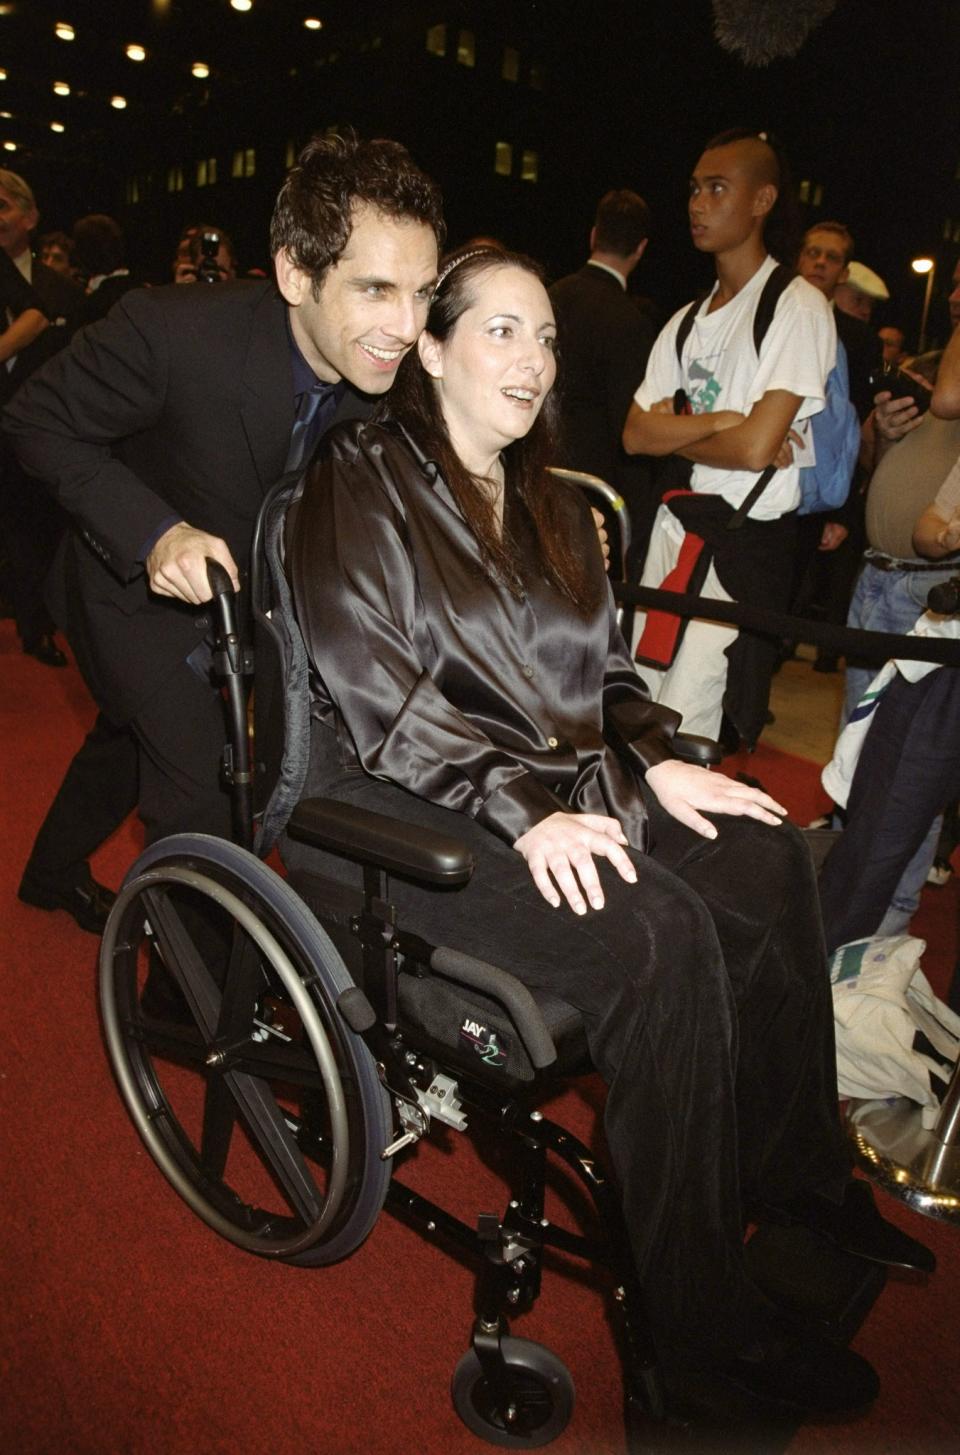 Ben Stiller helps producer Jenifer Estess, a 2001 Woman of the Year, at a 1999 event that raised $1.5 million for her Project ALS.